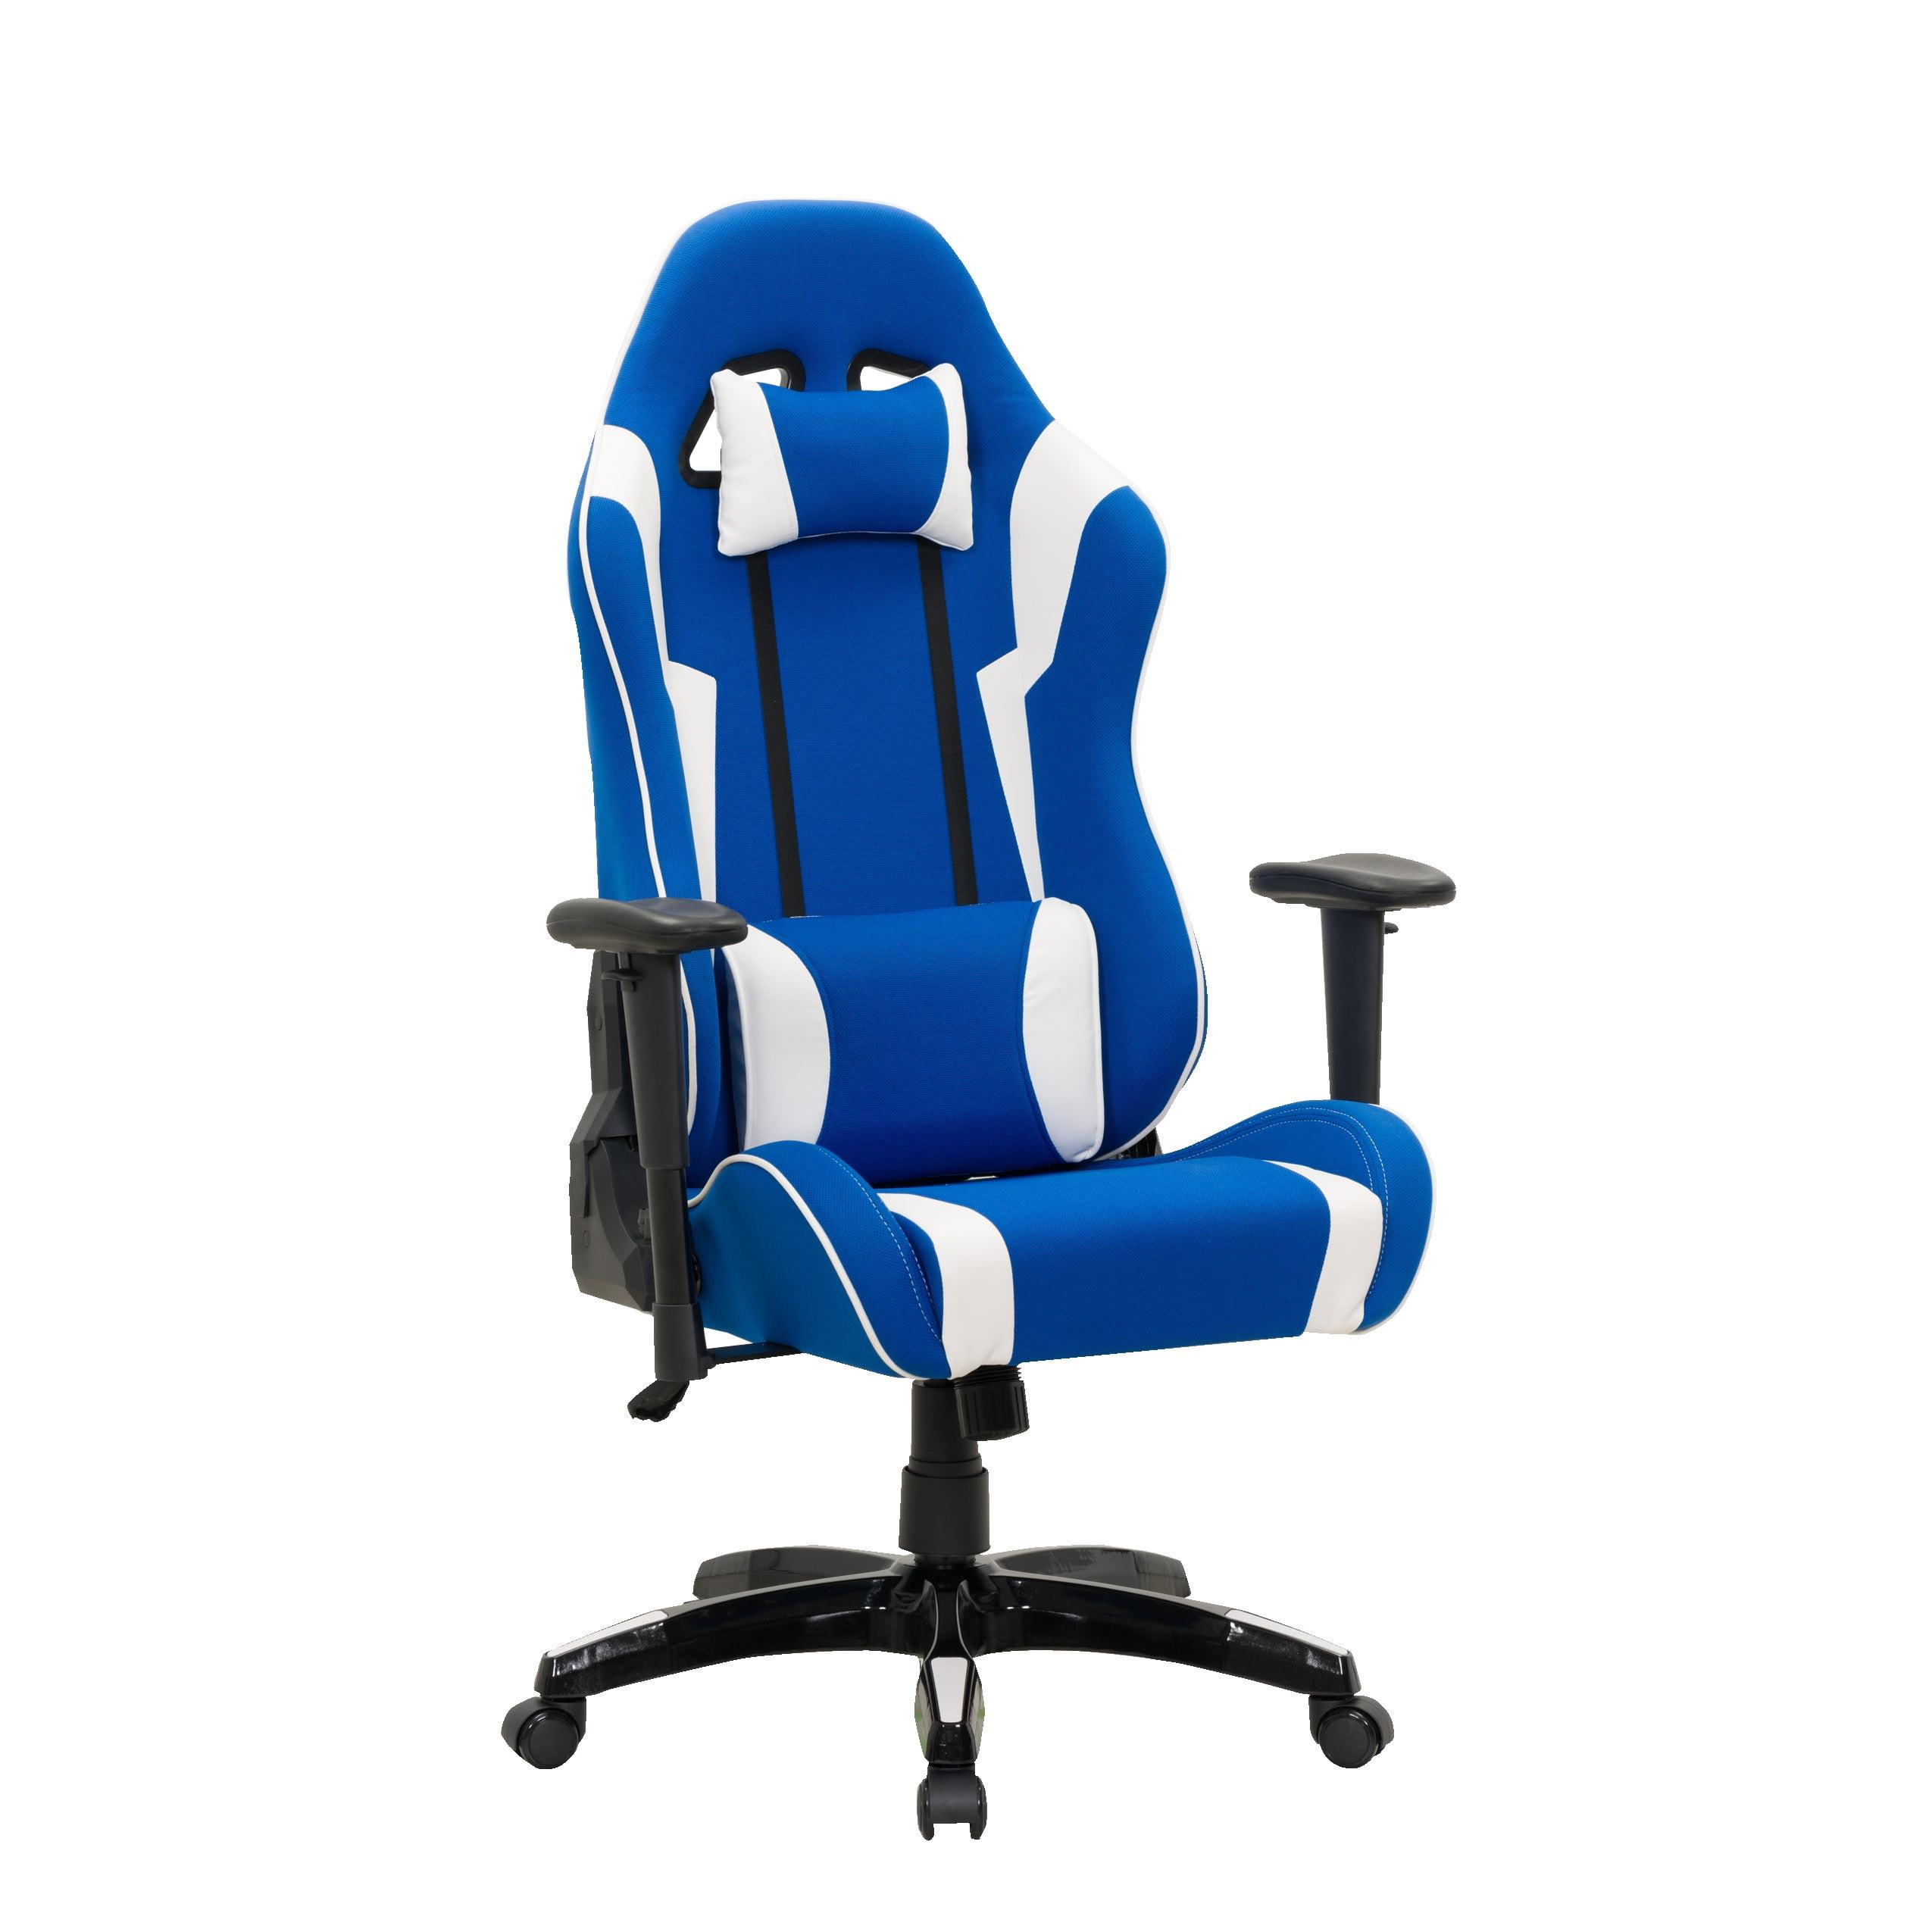 High-Performance Blue and White Ergonomic Gaming Chair with Adjustable Features